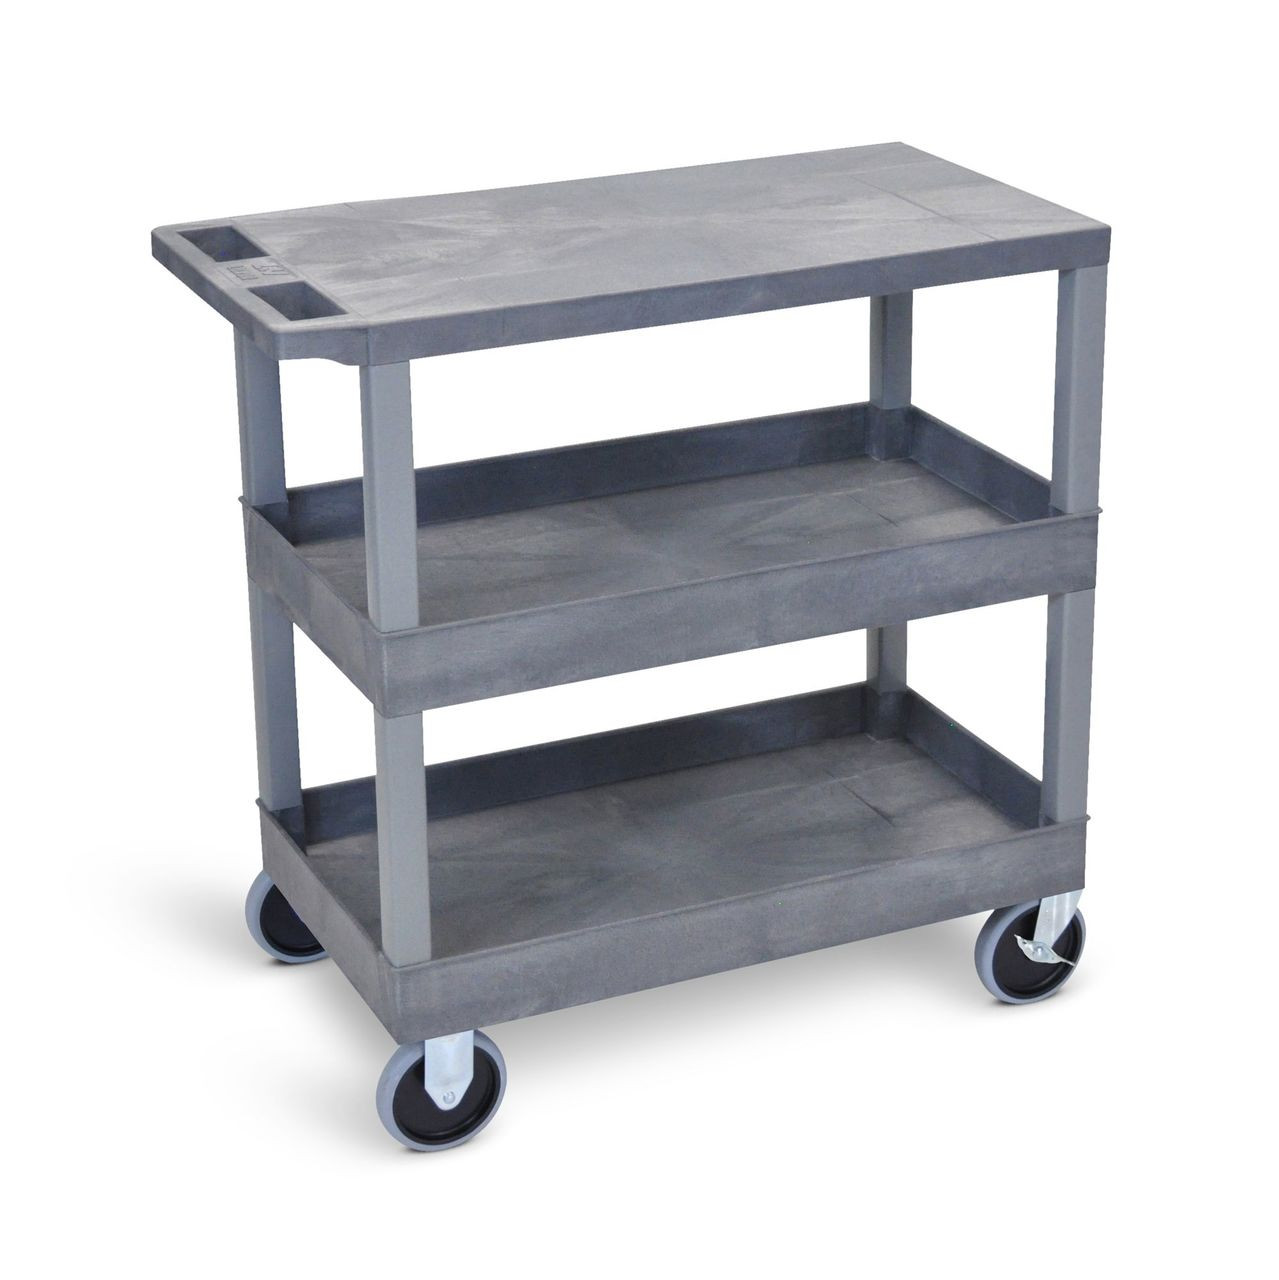 32"W x 18"D - Two Tub/One Flat Shelves with 5" Casters - Gray